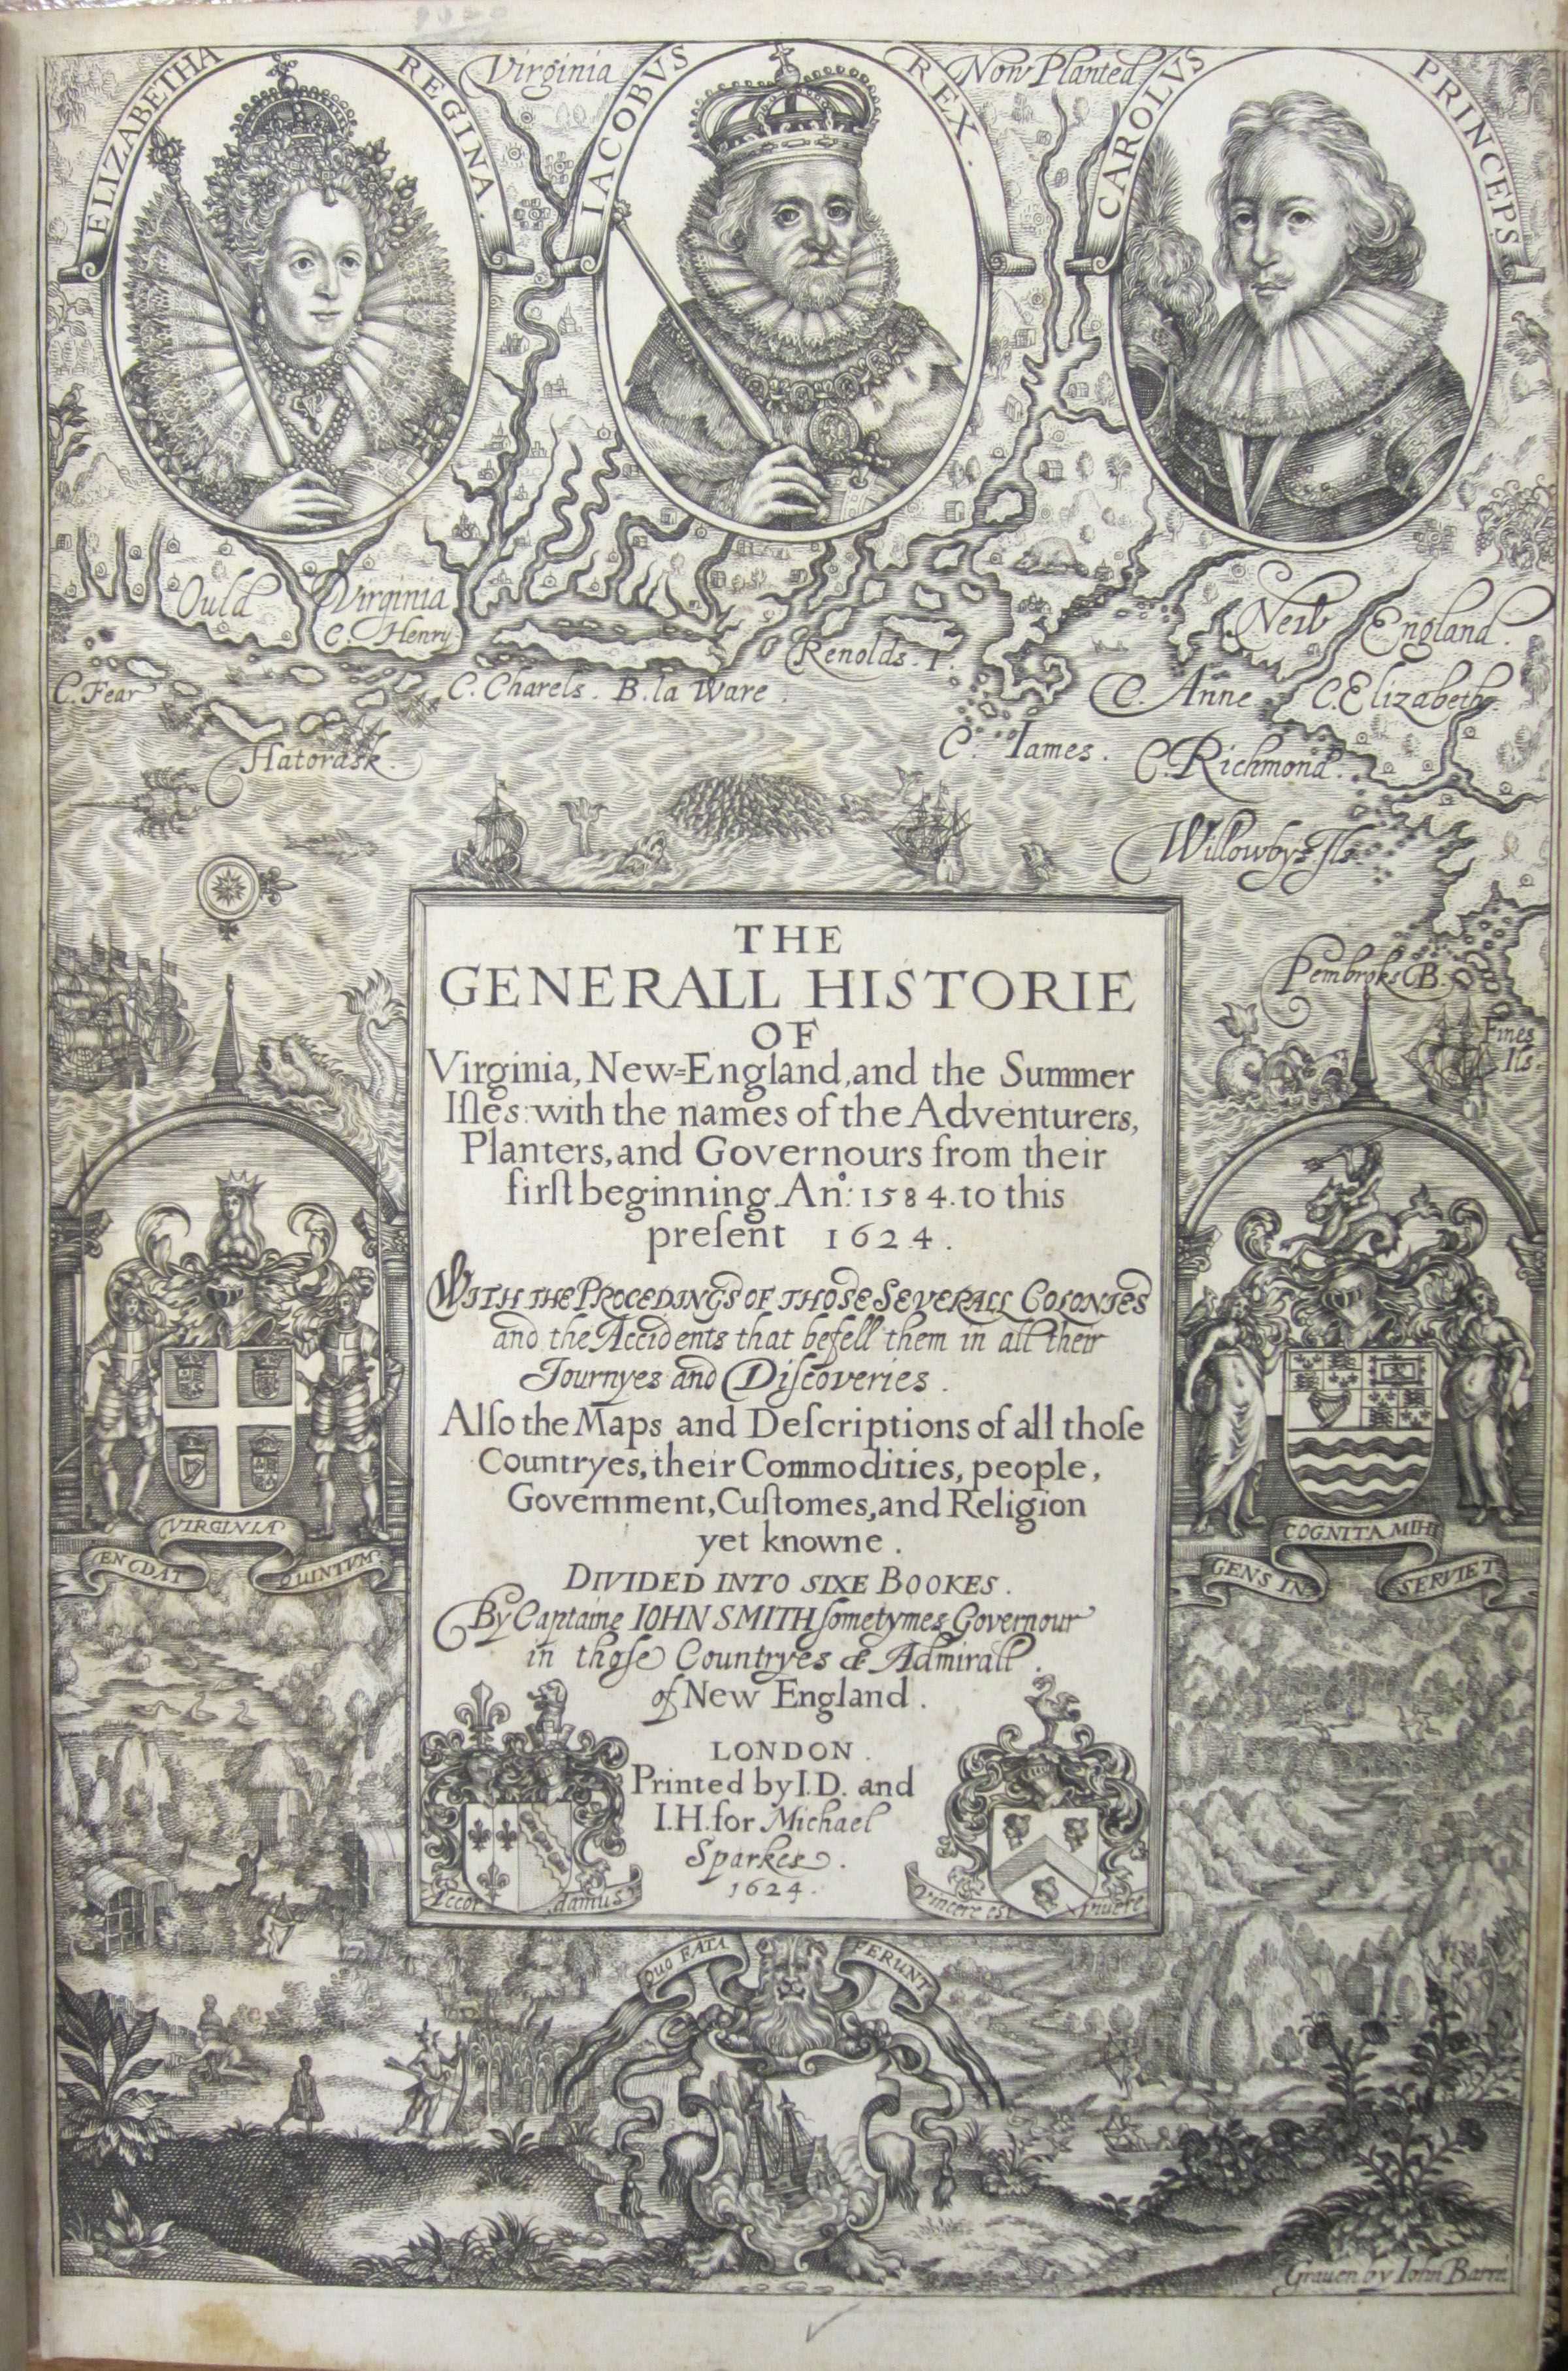 Title page of The Generall Historie of Virginia, New England, and the Summer Isles by John Smith, 1624. (A 1624 .S55. Tracy W. McGregor Library of American History. Photograph by Petrina Jackson)